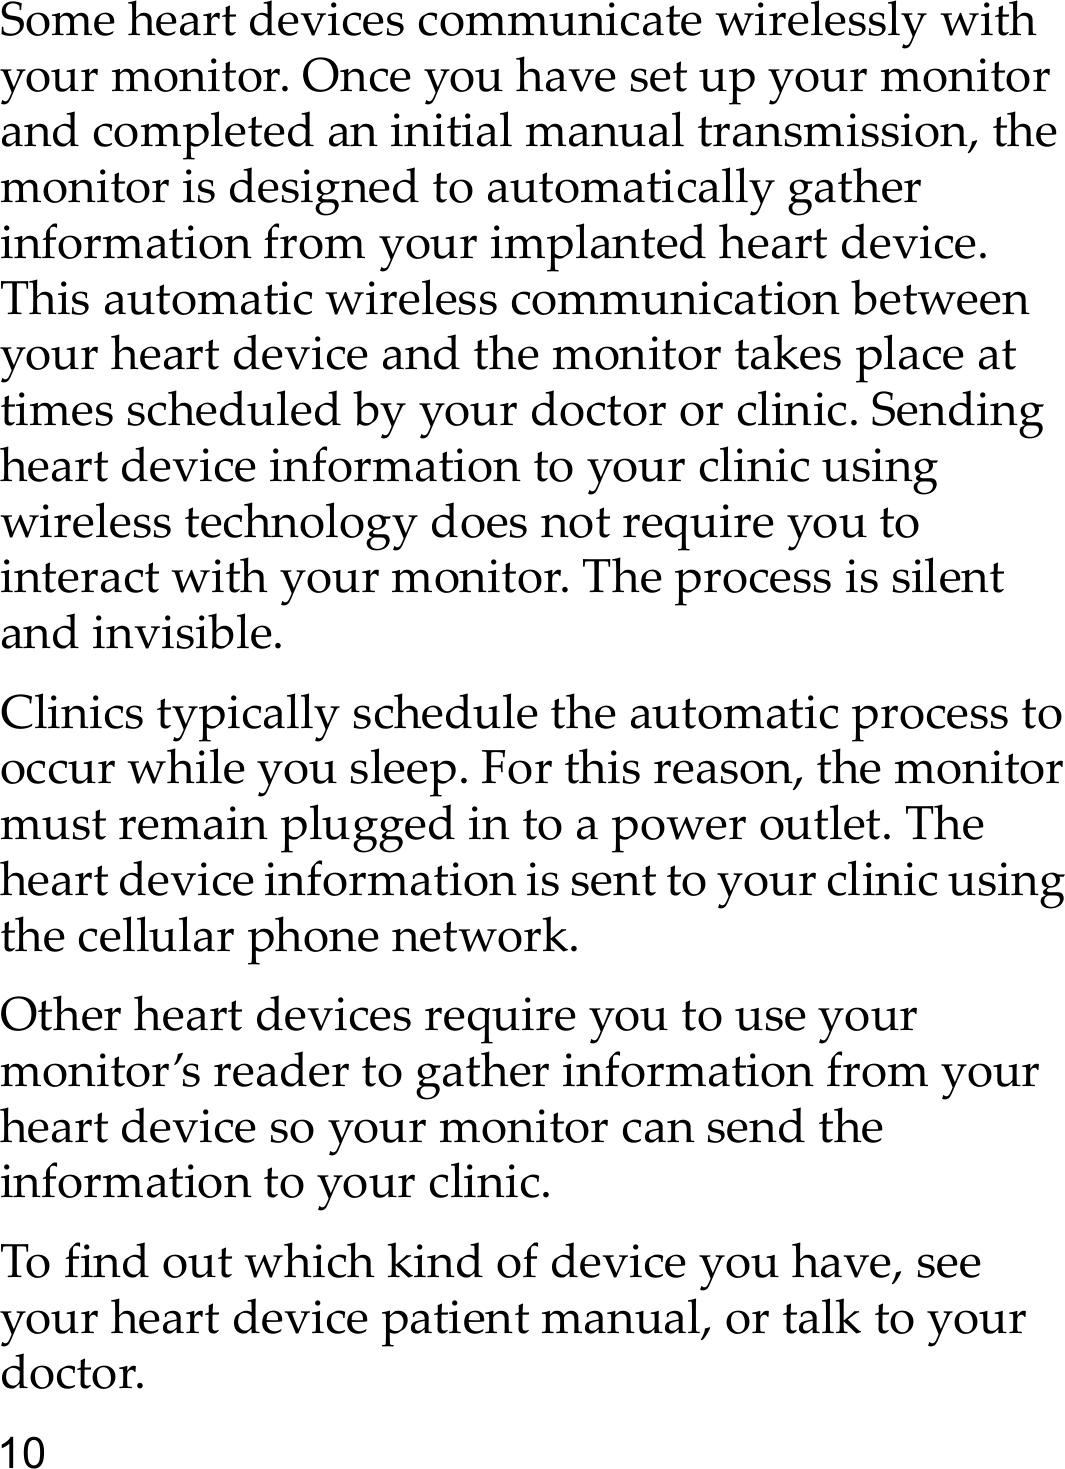 10Some heart devices communicate wirelessly with your monitor. Once you have set up your monitor and completed an initial manual transmission, the monitor is designed to automatically gather information from your implanted heart device. This automatic wireless communication between your heart device and the monitor takes place at times scheduled by your doctor or clinic. Sending heart device information to your clinic using wireless technology does not require you to interact with your monitor. The process is silent and invisible. Clinics typically schedule the automatic process to occur while you sleep. For this reason, the monitor must remain plugged in to a power outlet. The heart device information is sent to your clinic using the cellular phone network. Other heart devices require you to use your monitor’s reader to gather information from your heart device so your monitor can send the information to your clinic.To find out which kind of device you have, see your heart device patient manual, or talk to your doctor.